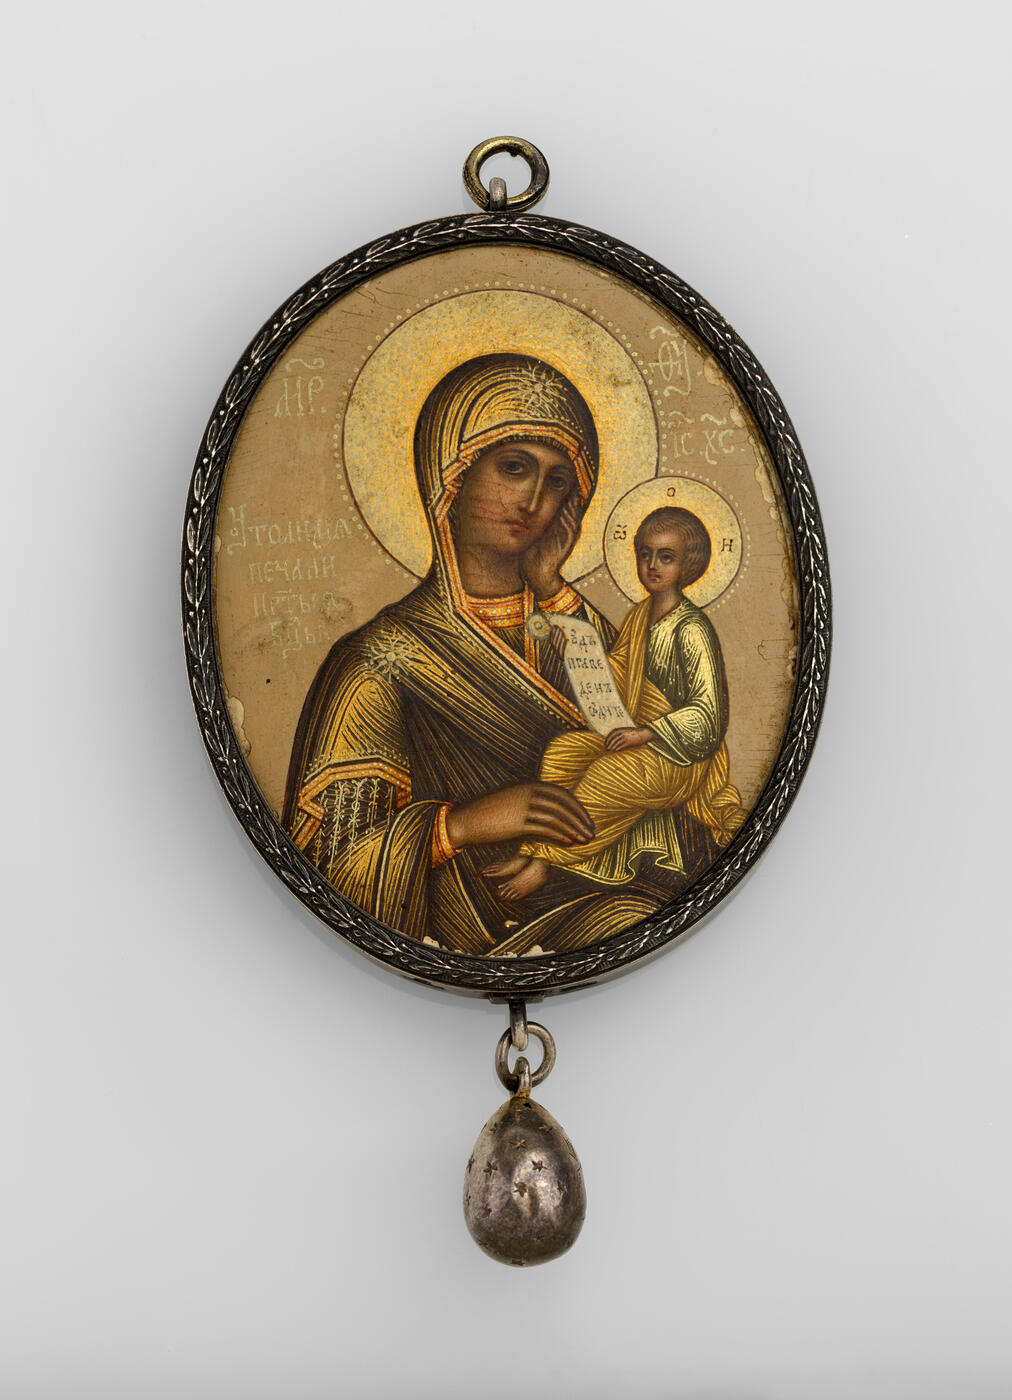 A Fabergé Icon of the Mother of God "Soothe My Sorrows" with Silver Egg Pendant